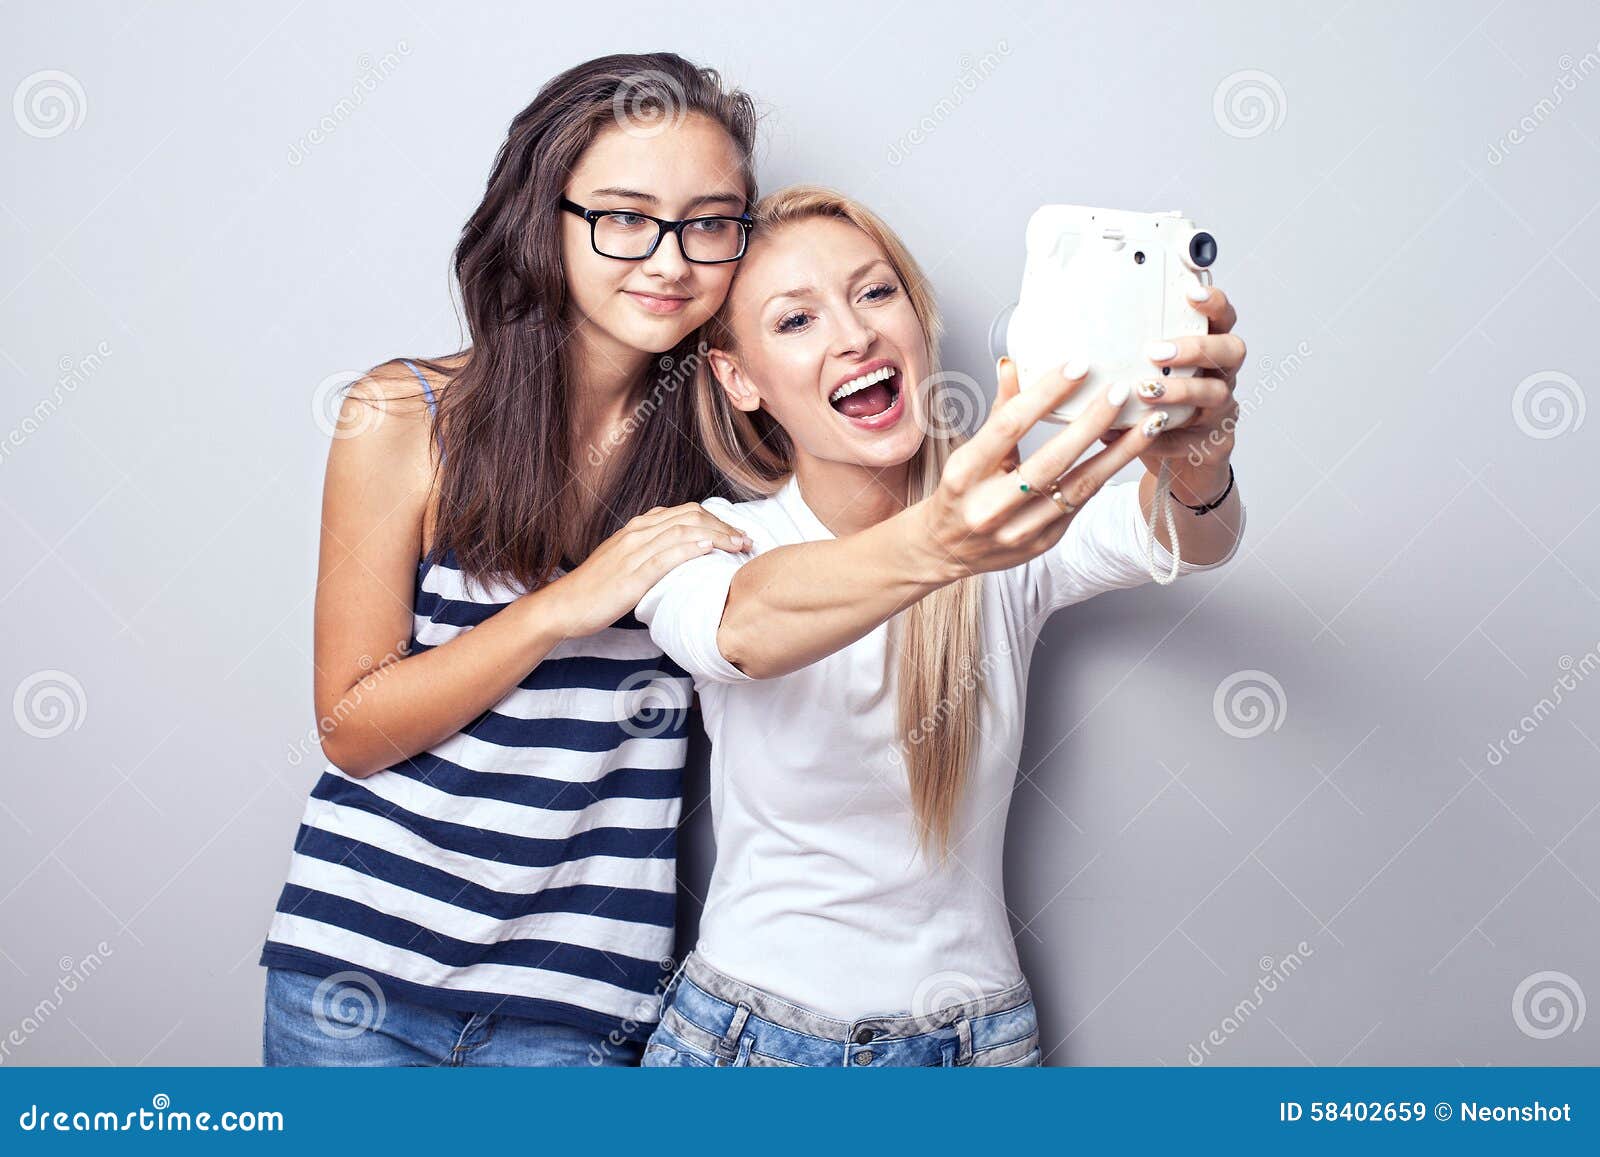 Two sisters using camera. stock image. Image of light - 58402659